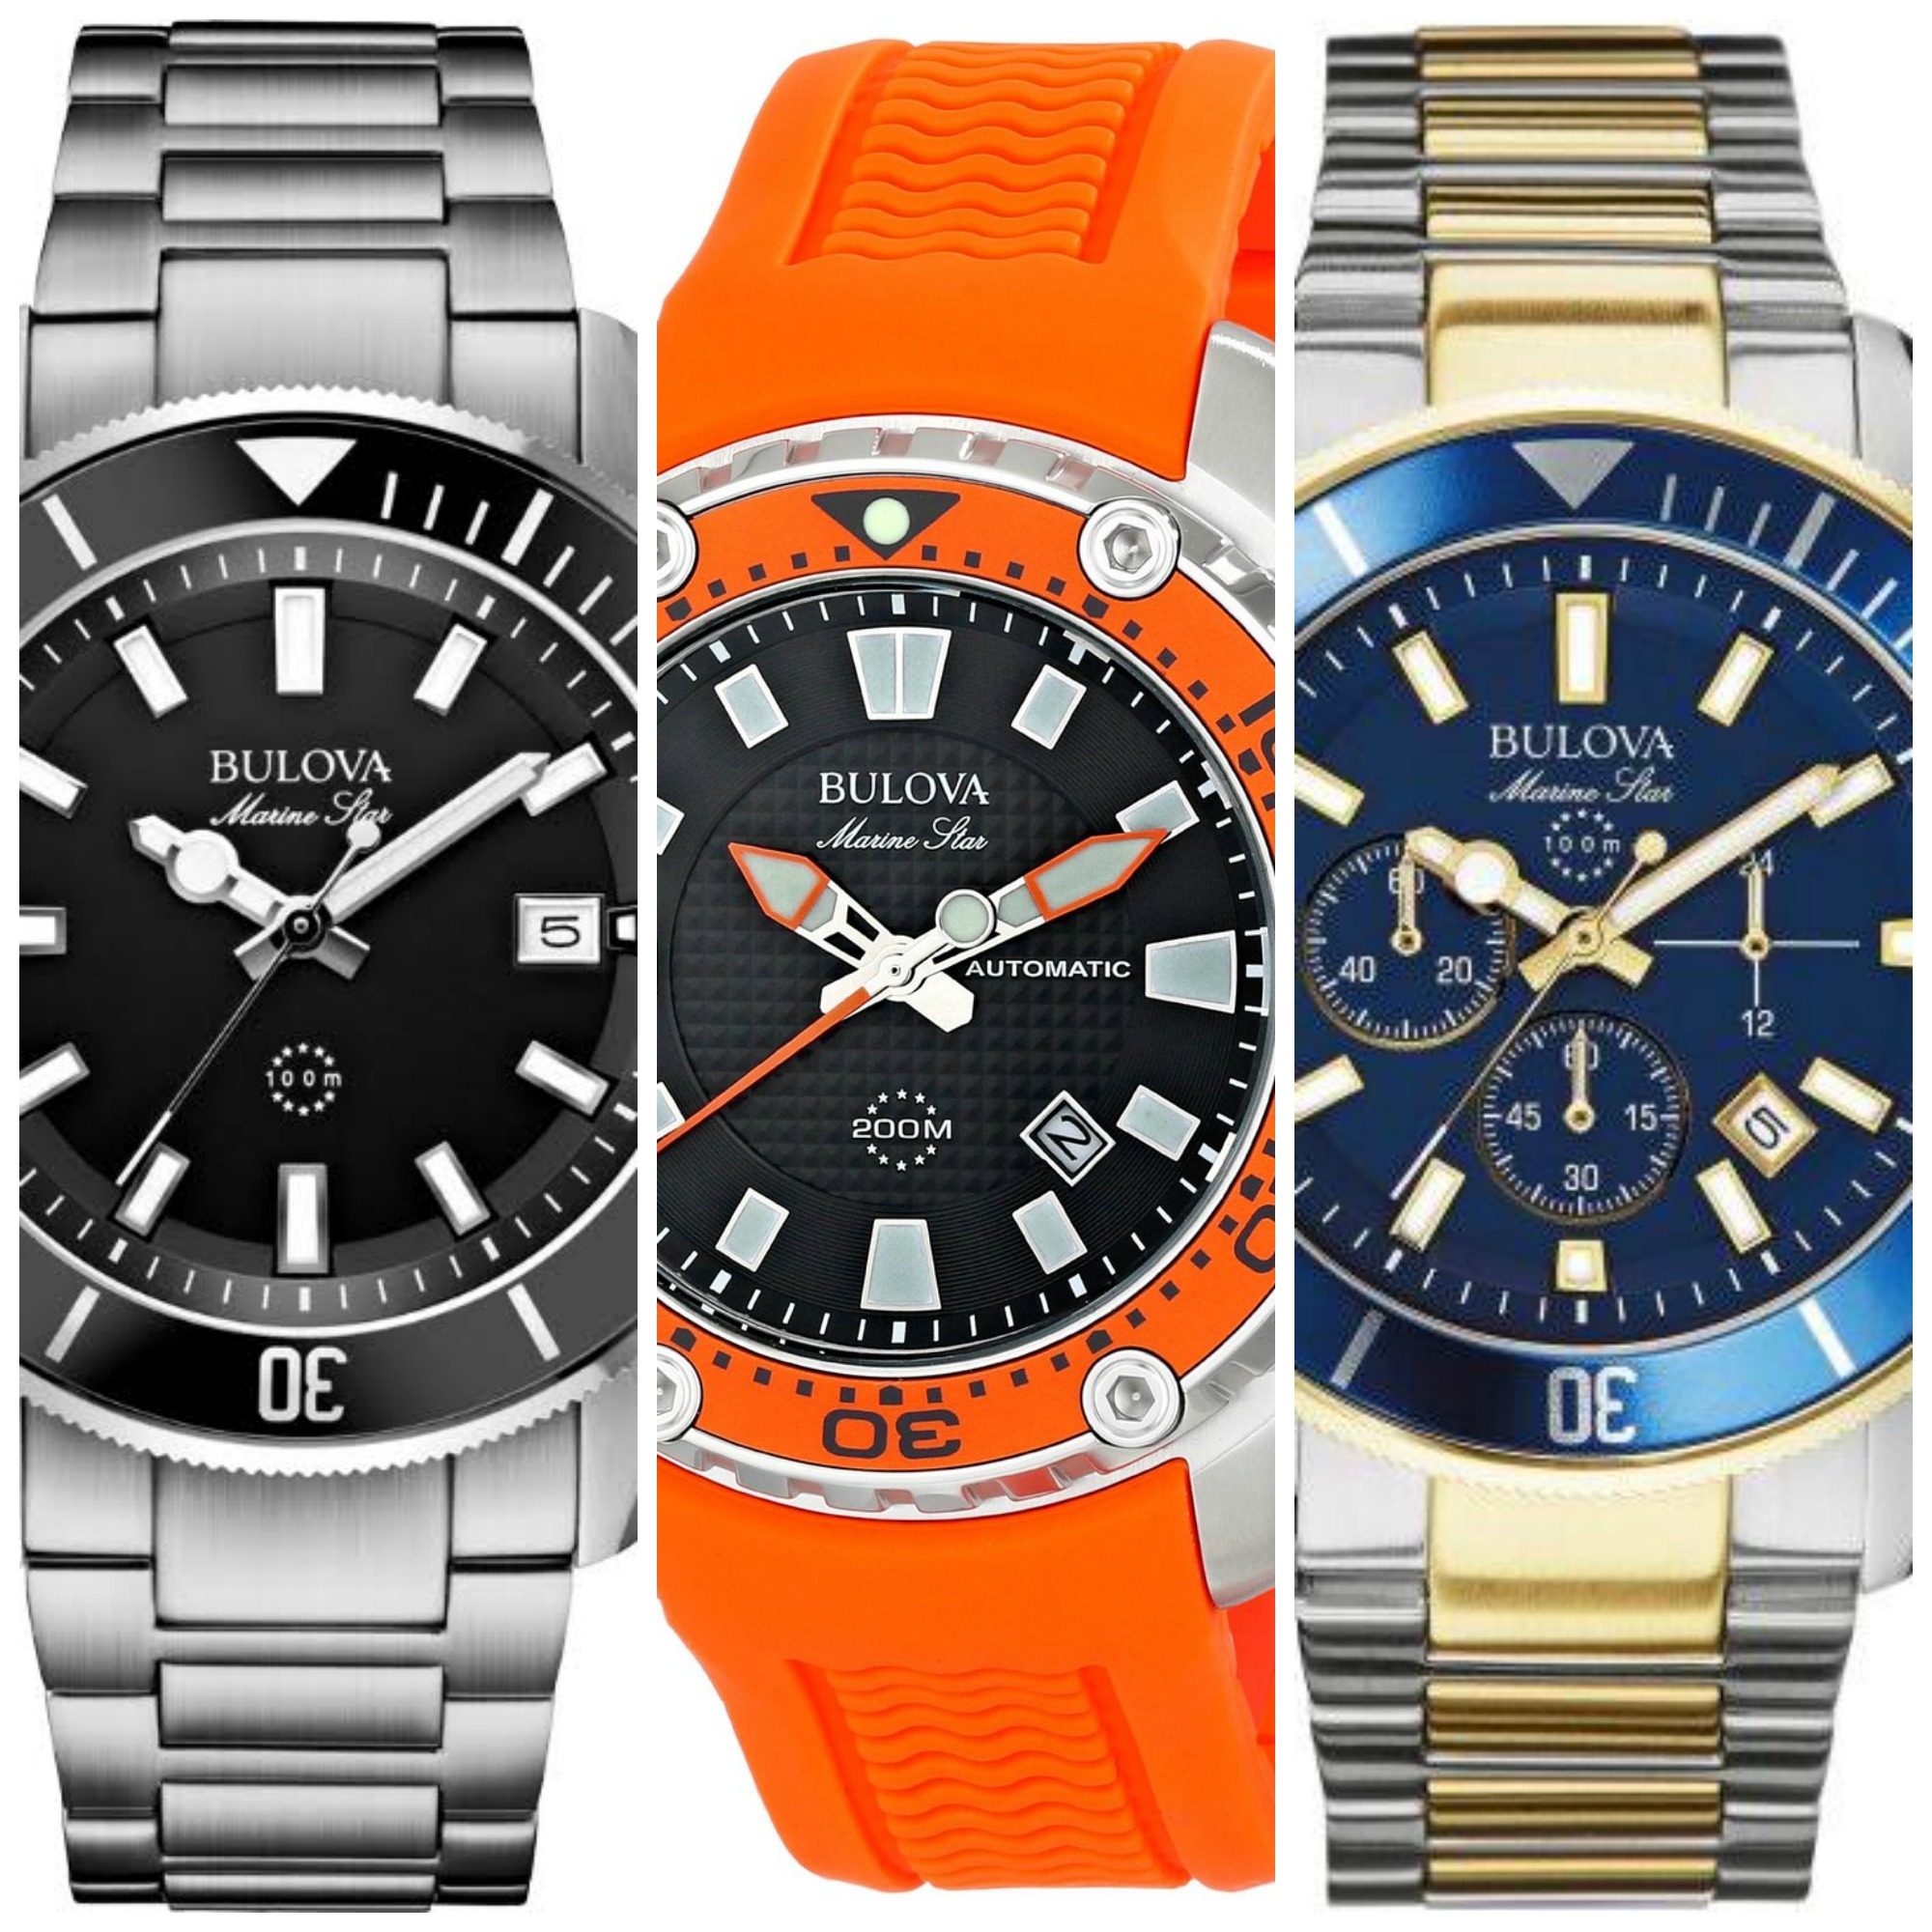 6 Best Selling Bulova Marine Star Watches For Men. Most Popular